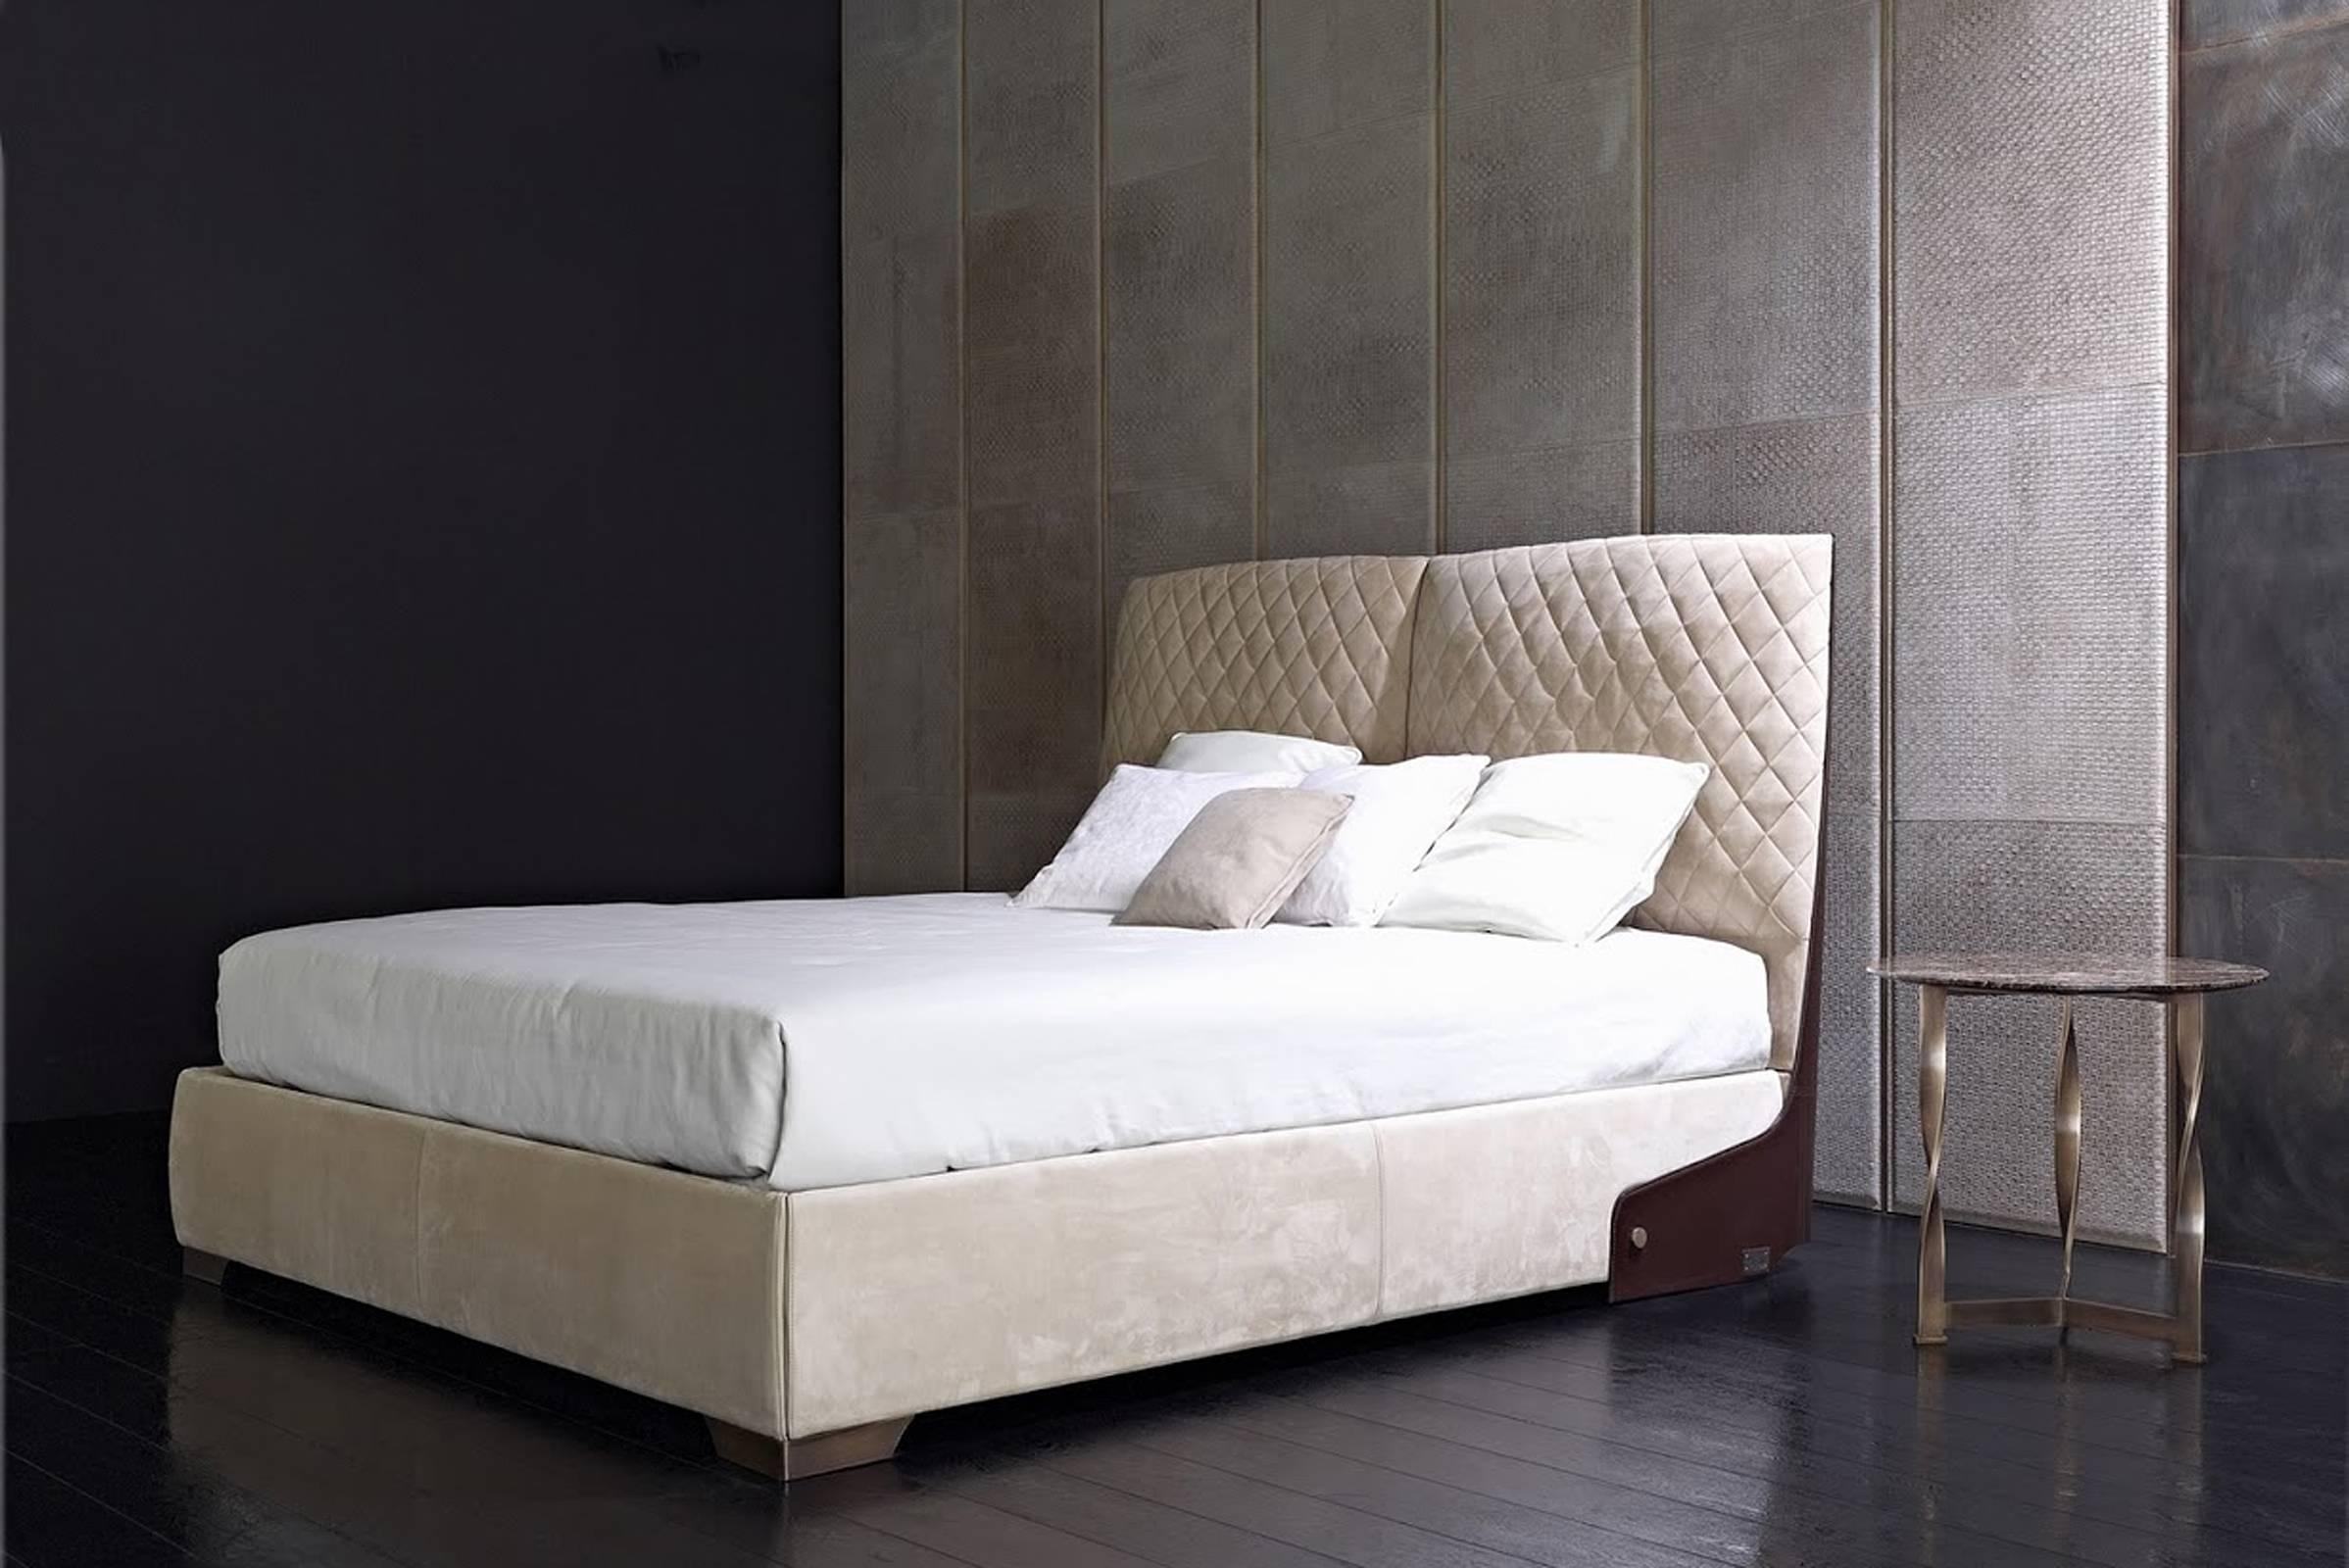 Bed Premium structure made with smooth leather category C,
headboard Matlassé in leather C,
Slat 180, not included in price.
Bed available with leather category D.
and fabric Technabuk category A.
Pacific Compagie